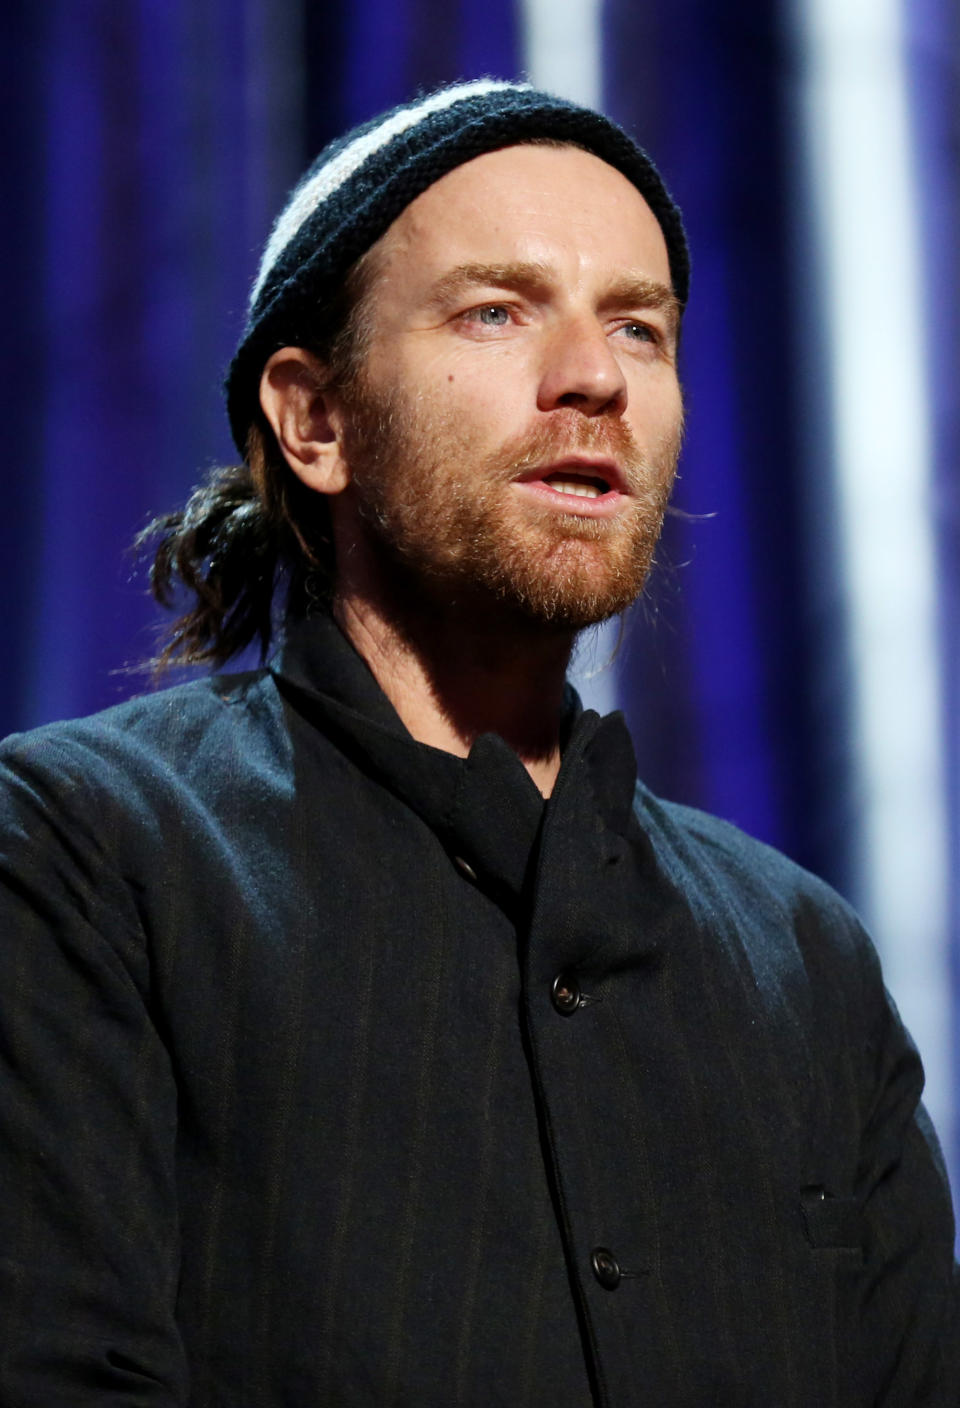 Ewan McGregor is seen onstage during rehearsals for the 86th Academy Awards in Los Angeles, Saturday, March 1, 2014. The Academy Awards will be held at the Dolby Theatre on Sunday, March 2. (Photo by Matt Sayles/Invision/AP)